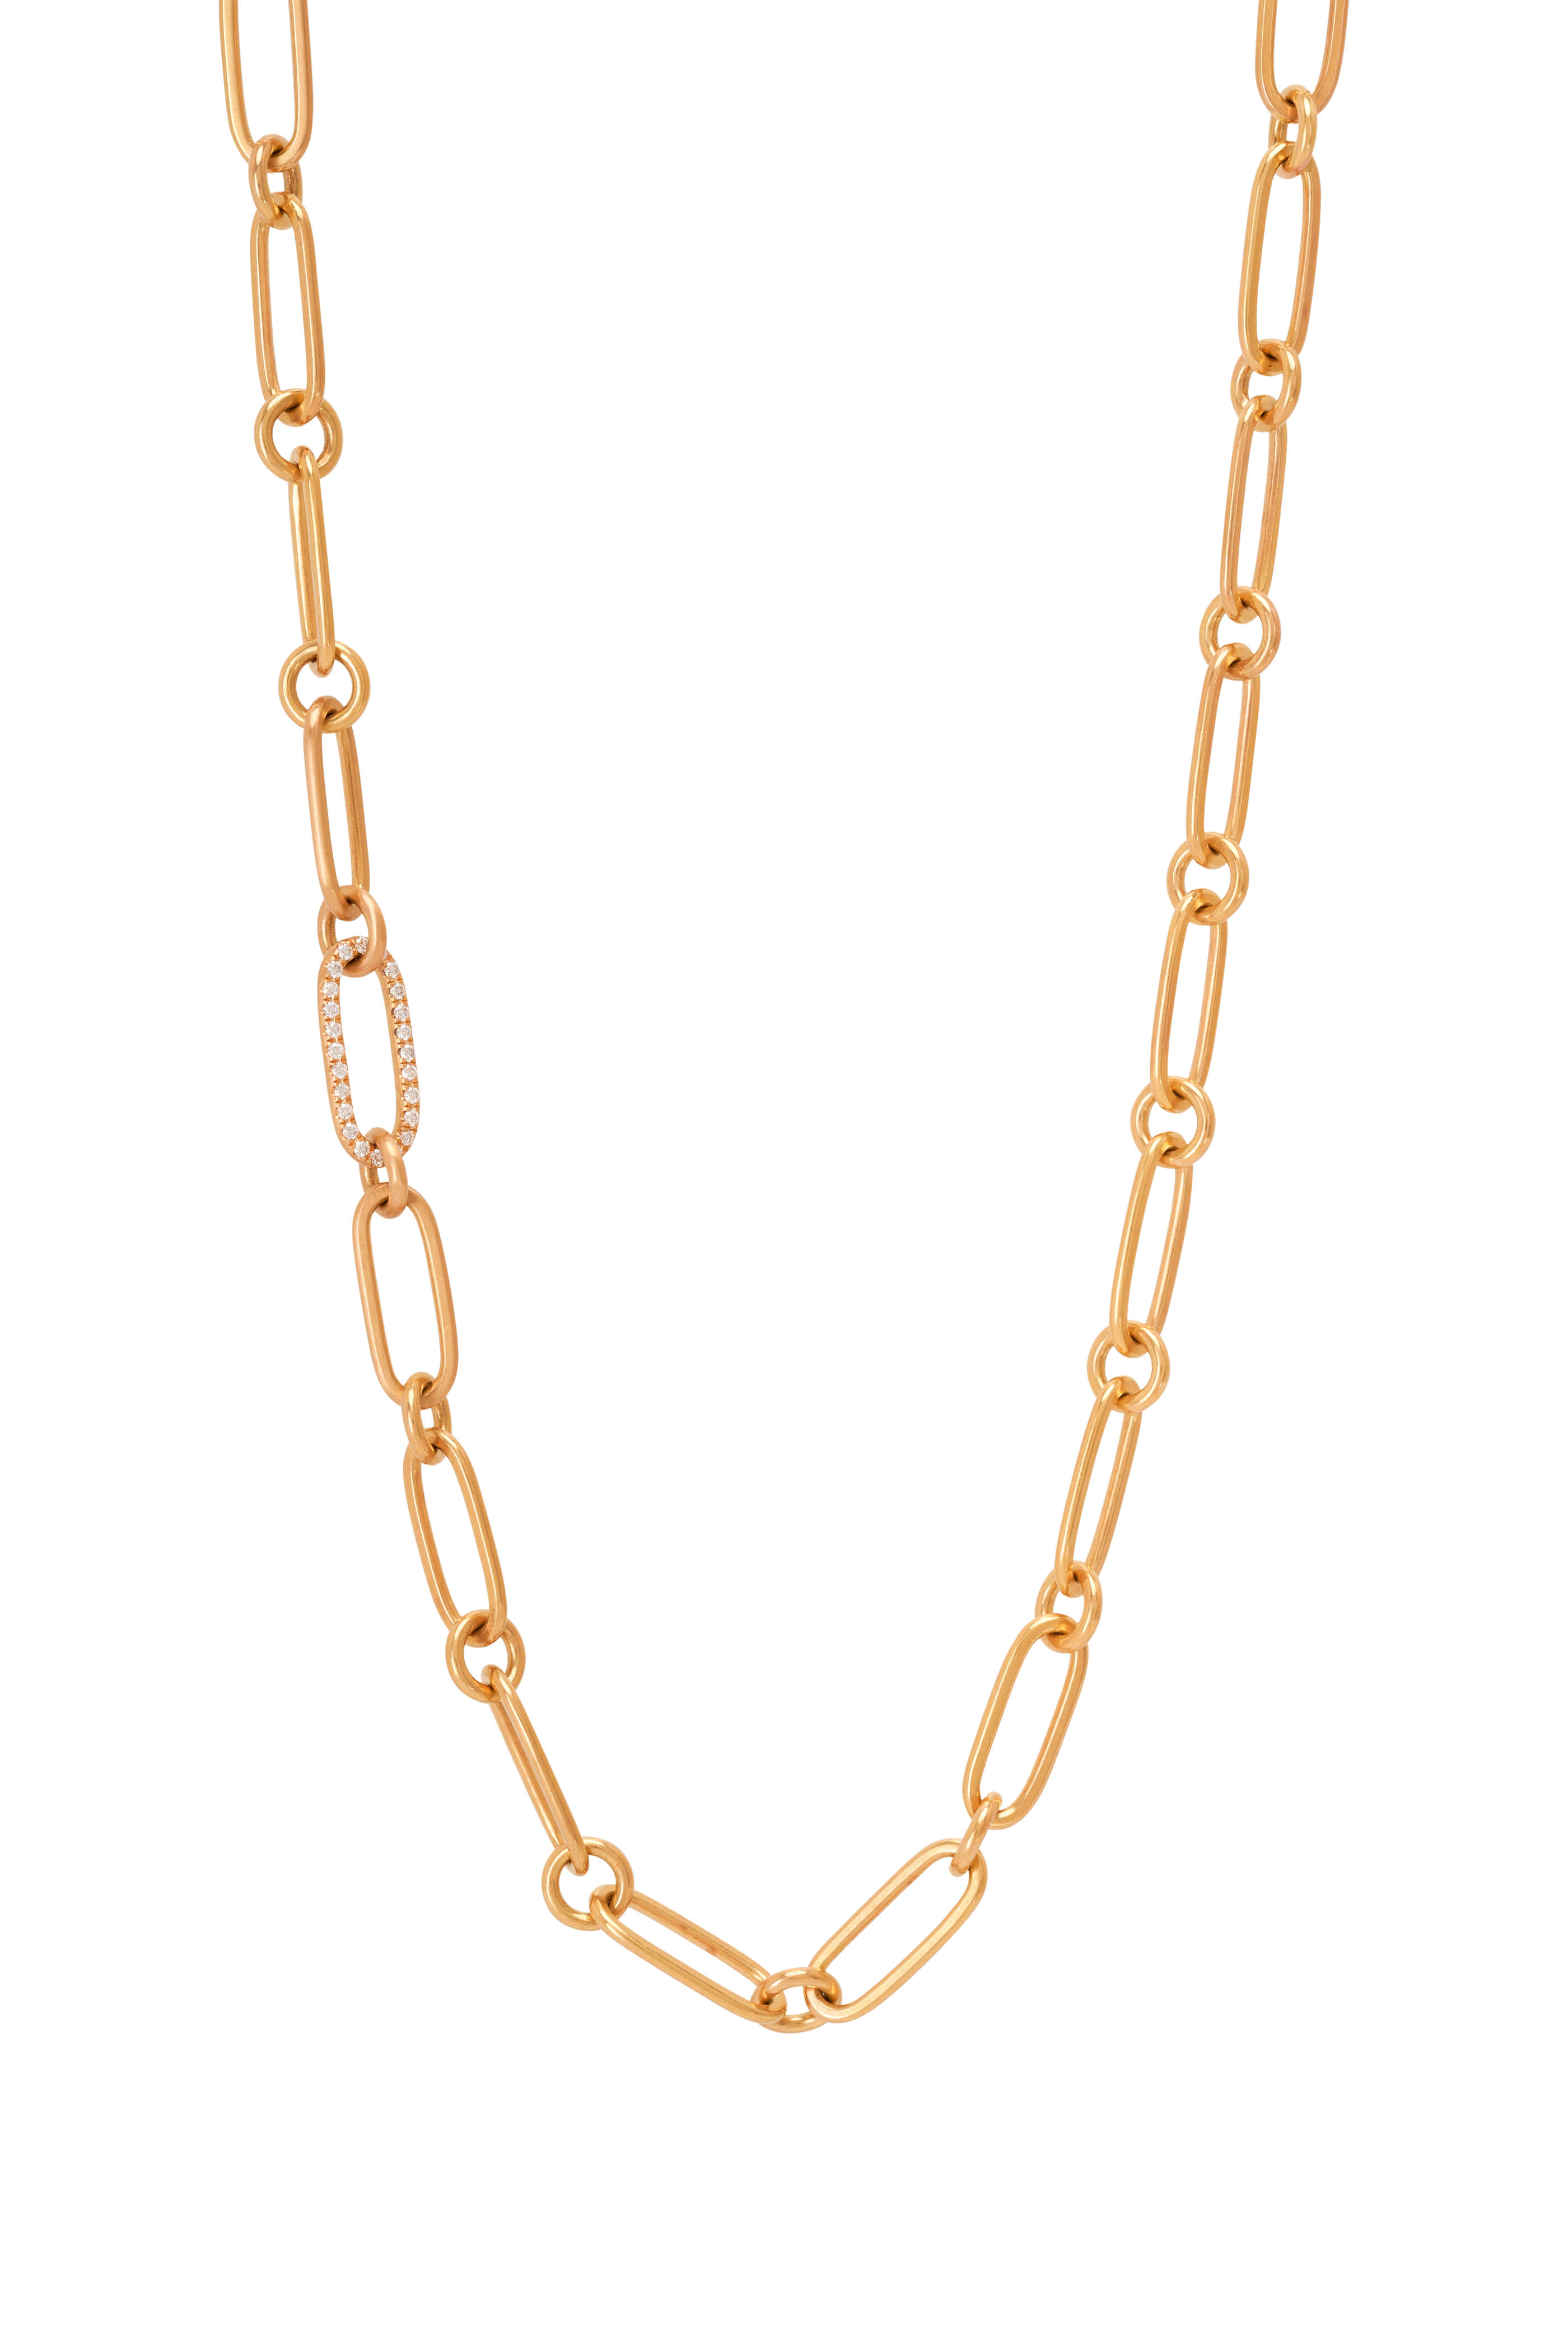 Chelsea Diamond Paperclip Chain Necklace (1/4 Ct. tw.) - 14K Yellow Gold